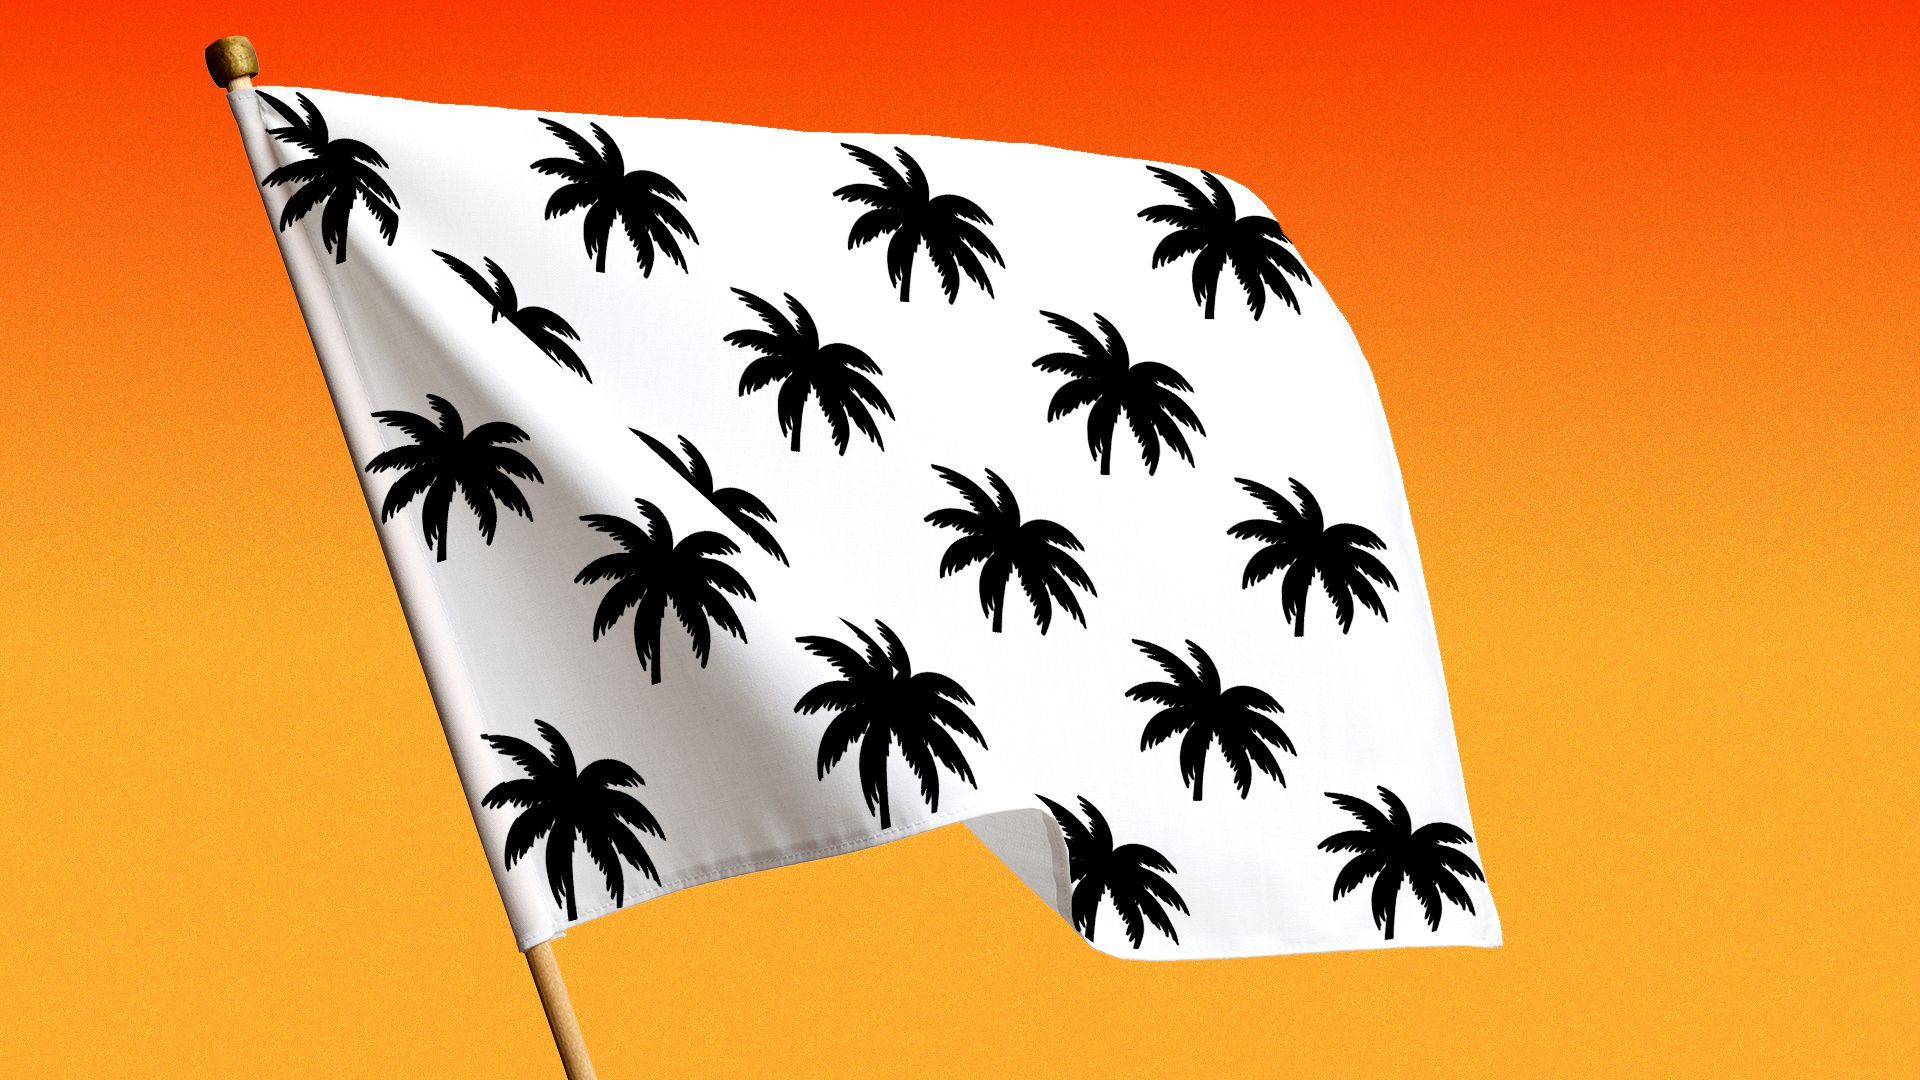 Illustration of a checkered racing flag with palm tree shapes in place of black squares